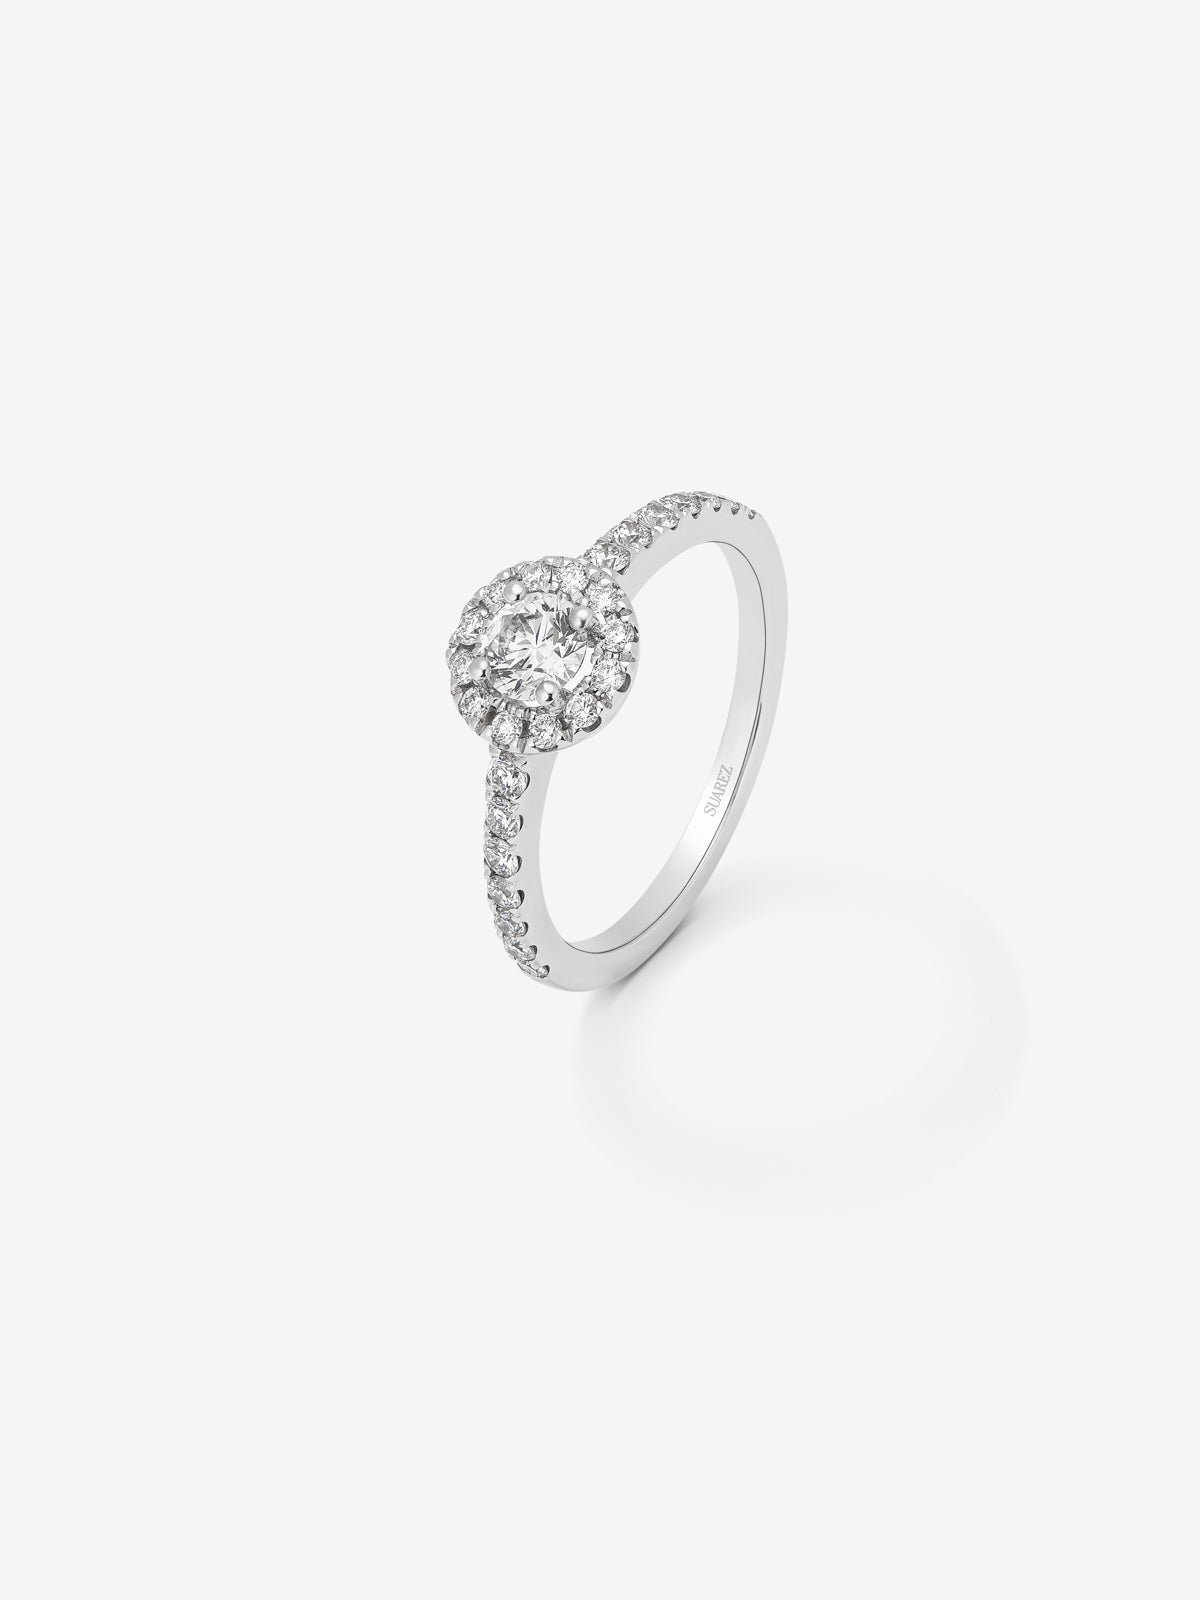 18K white gold ring with central brilliant-cut diamond of 0.15 cts and border and arm of 28 brilliant-cut diamonds with a total of 0.3 cts